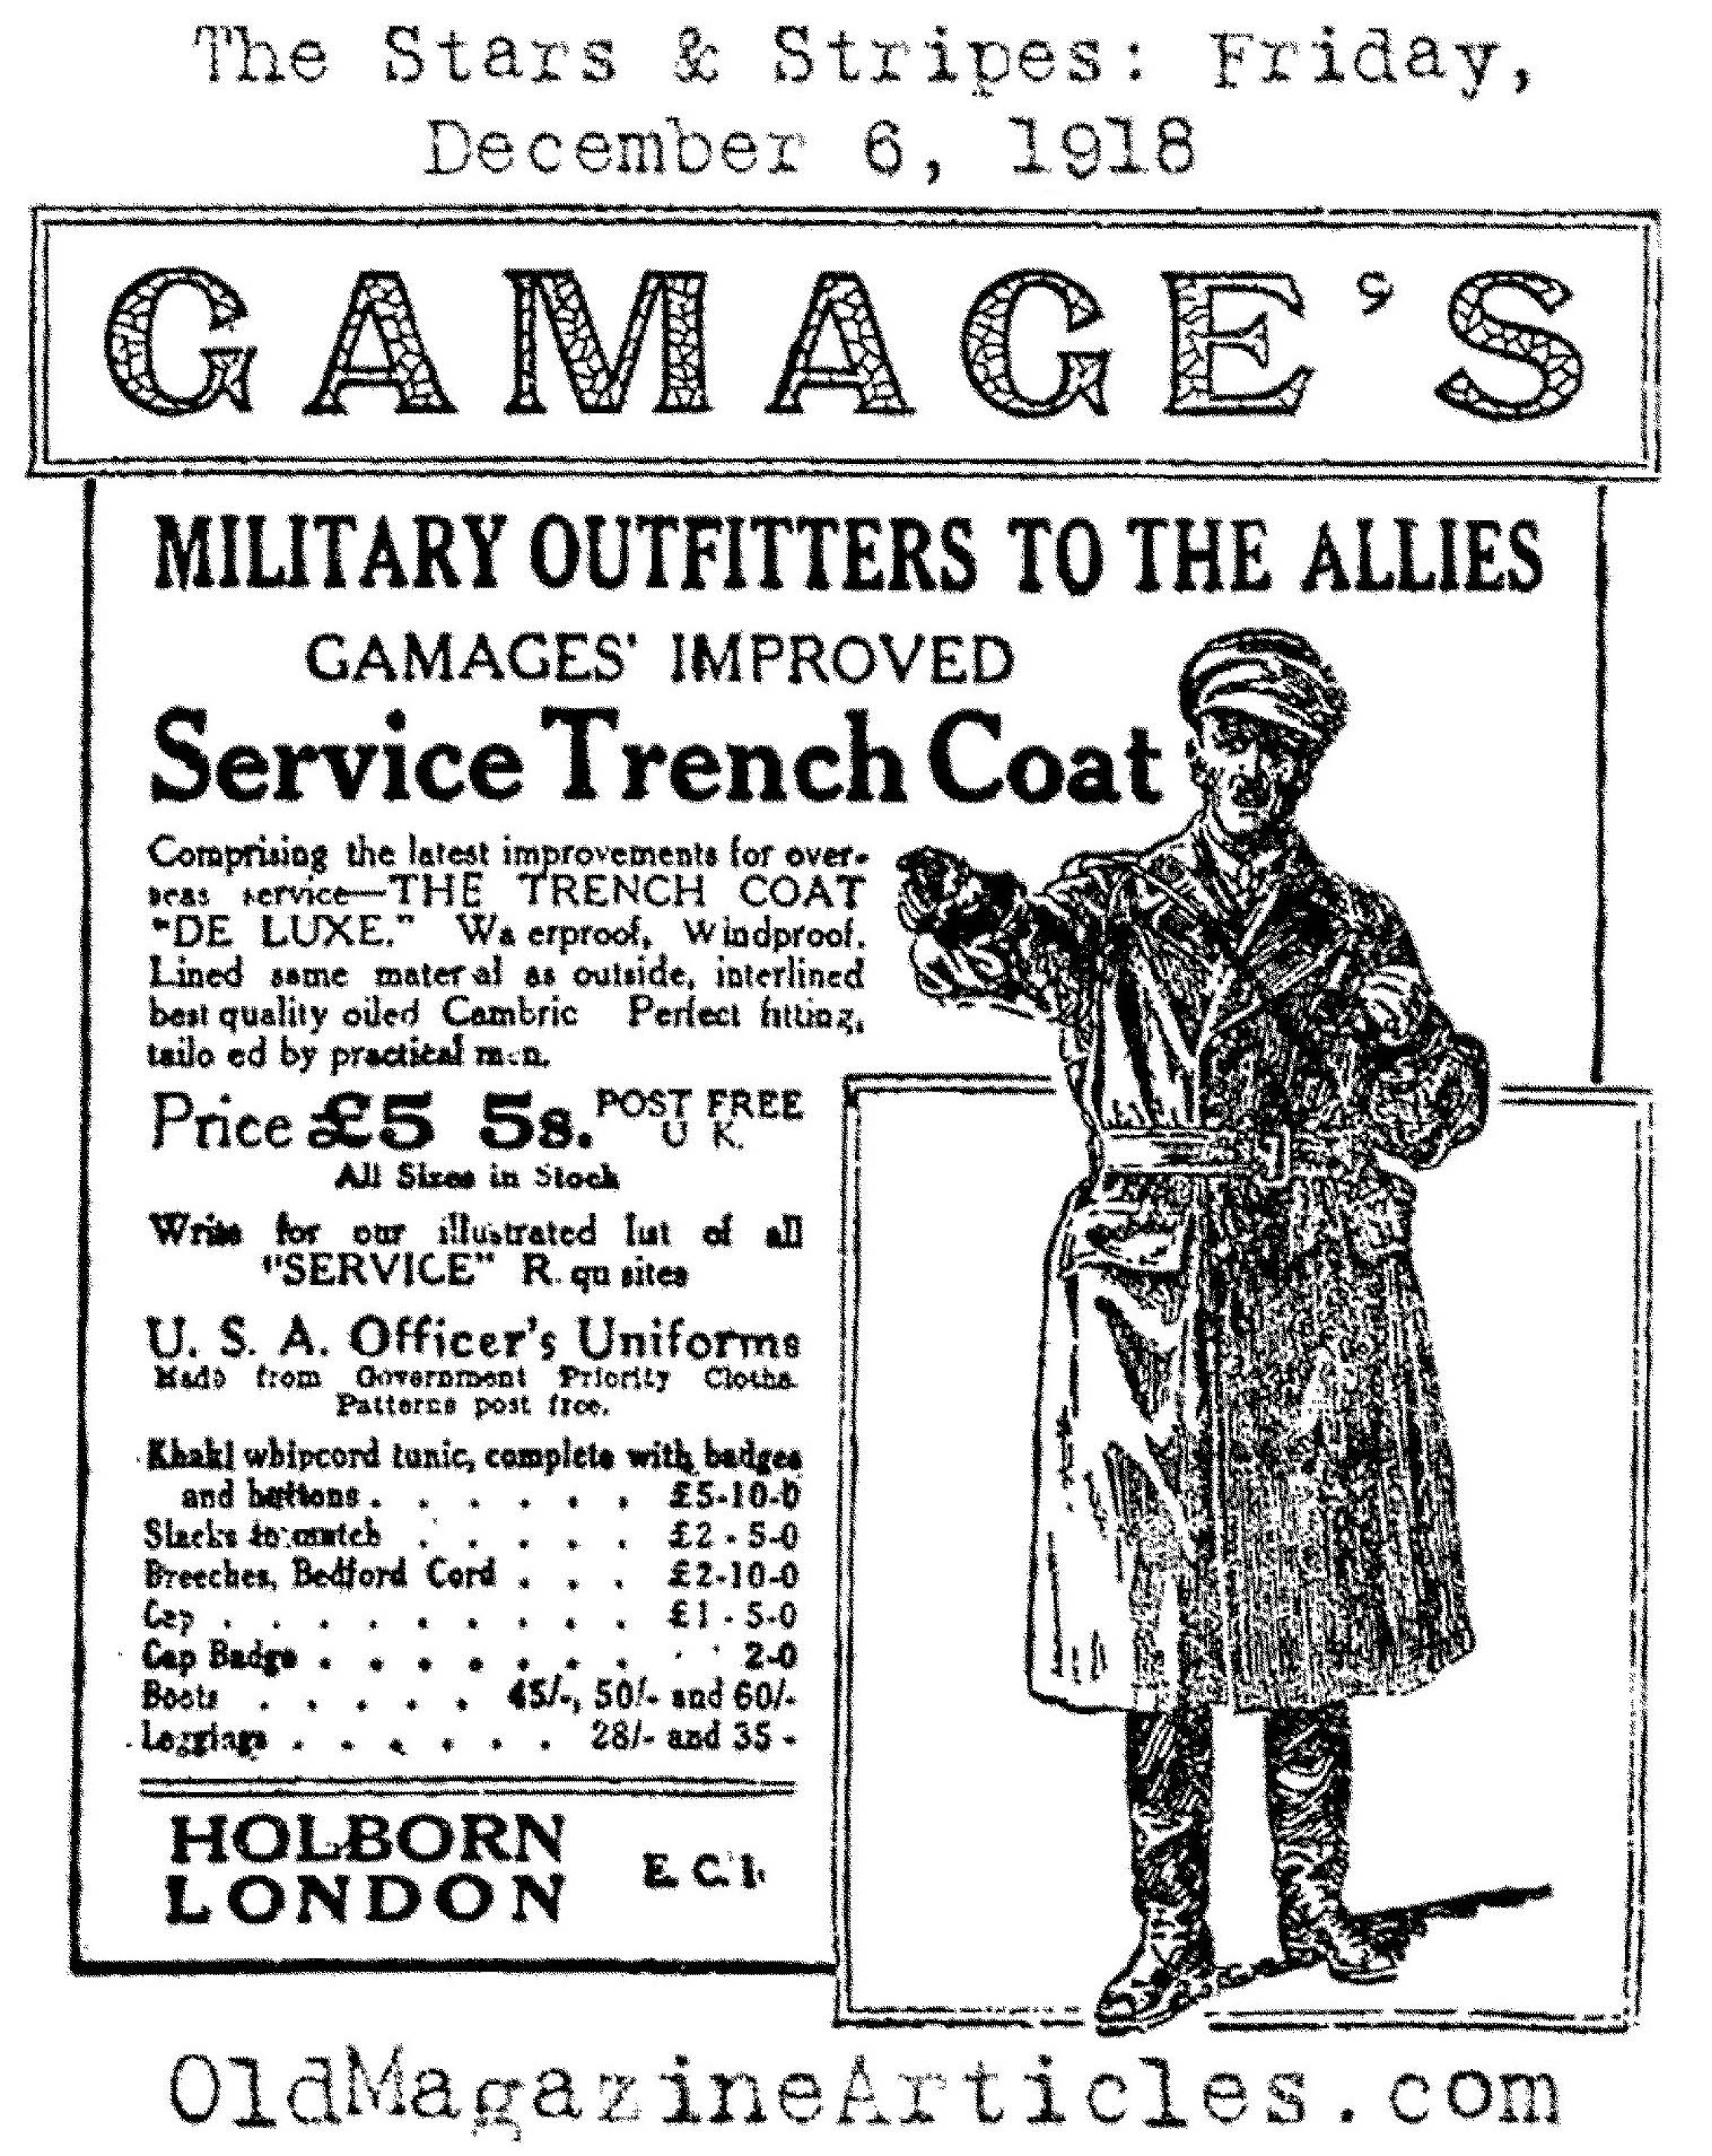 Trench Coat by Gamage  (The Stars and Stripes, 1918)